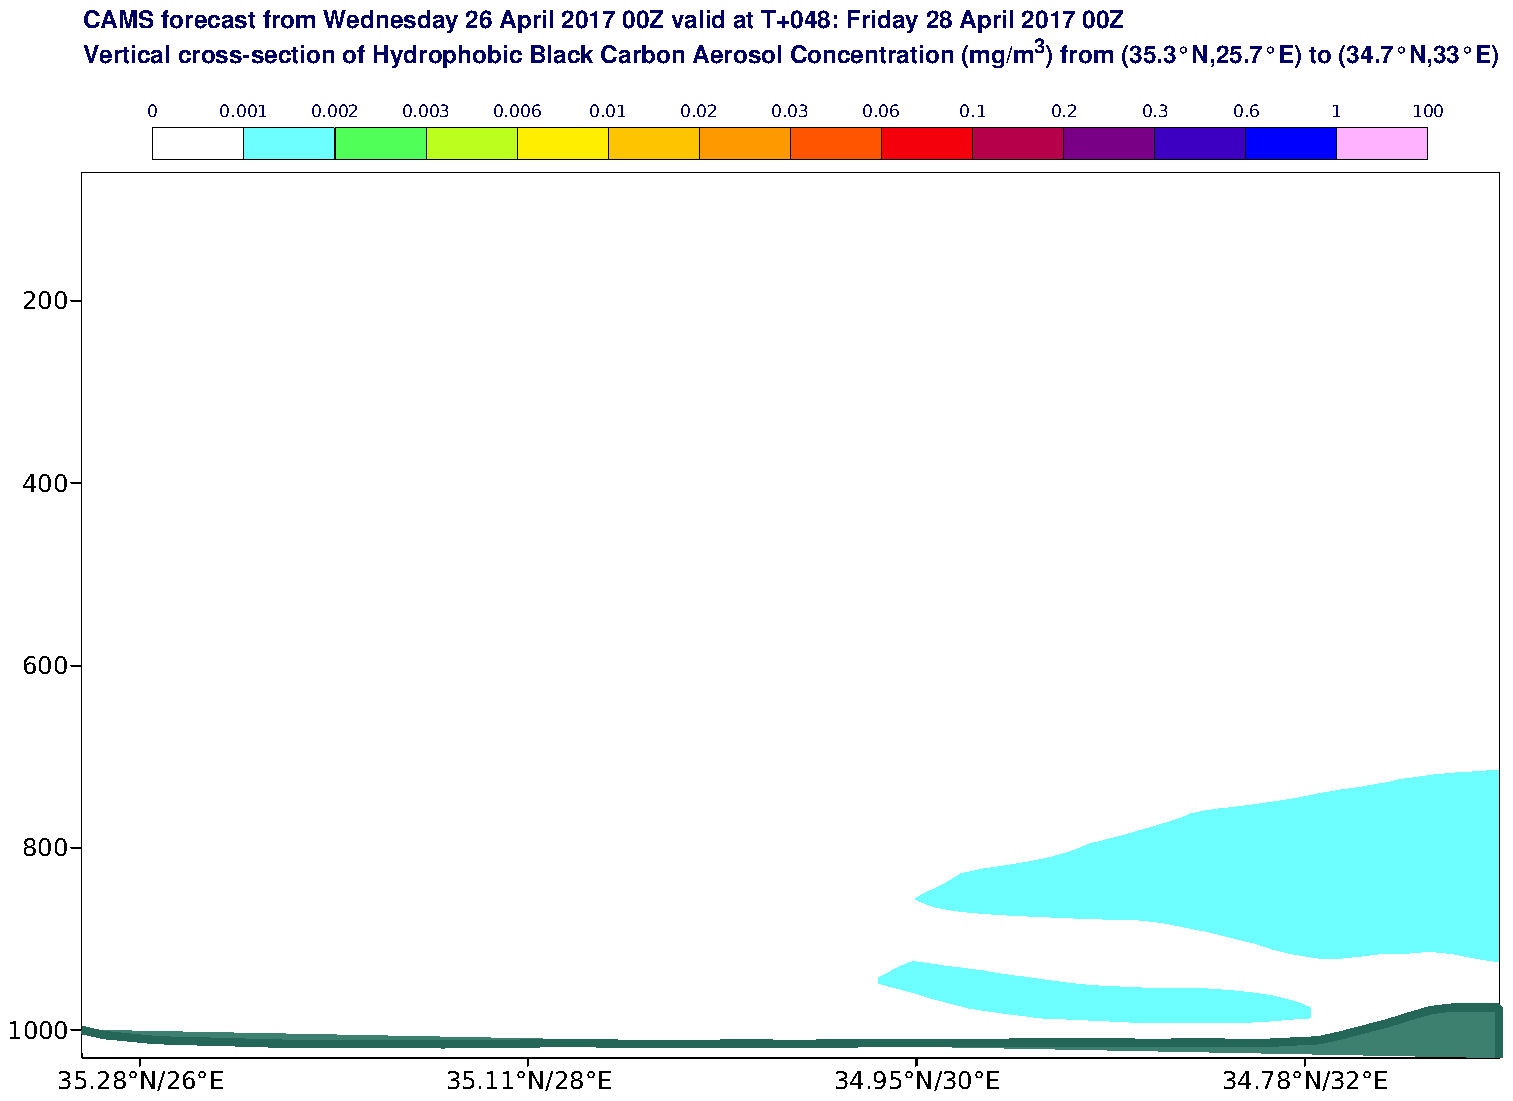 Vertical cross-section of Hydrophobic Black Carbon Aerosol Concentration (mg/m3) valid at T48 - 2017-04-28 00:00